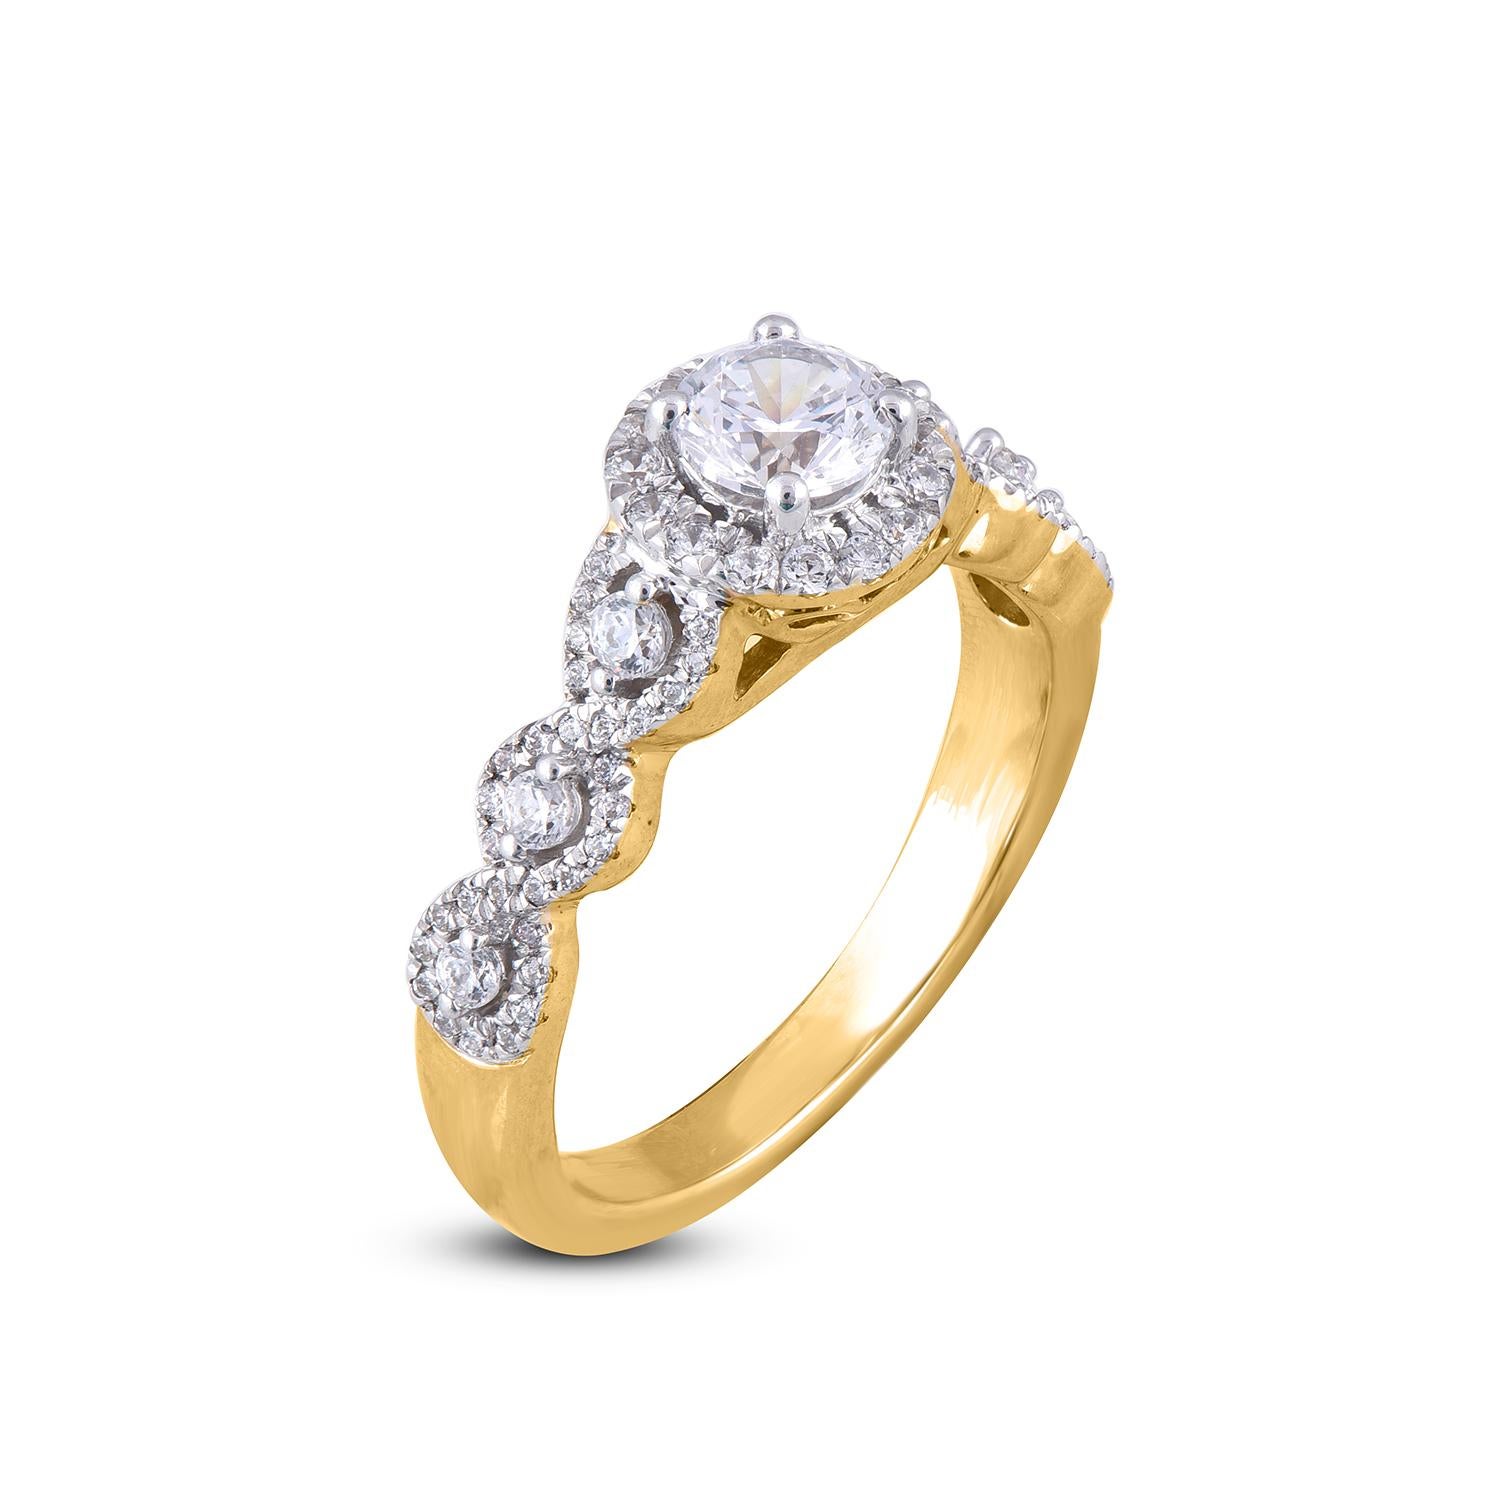 Stunning Twisted Shank Diamond Engagement Ring for Your Soul Mate! this ring is expertly crafted in 18 Karat Yellow Gold and features 0.50ct centre stone and 0.50ct of diamond frame and shank lined with 82 round diamonds set in prong setting. The